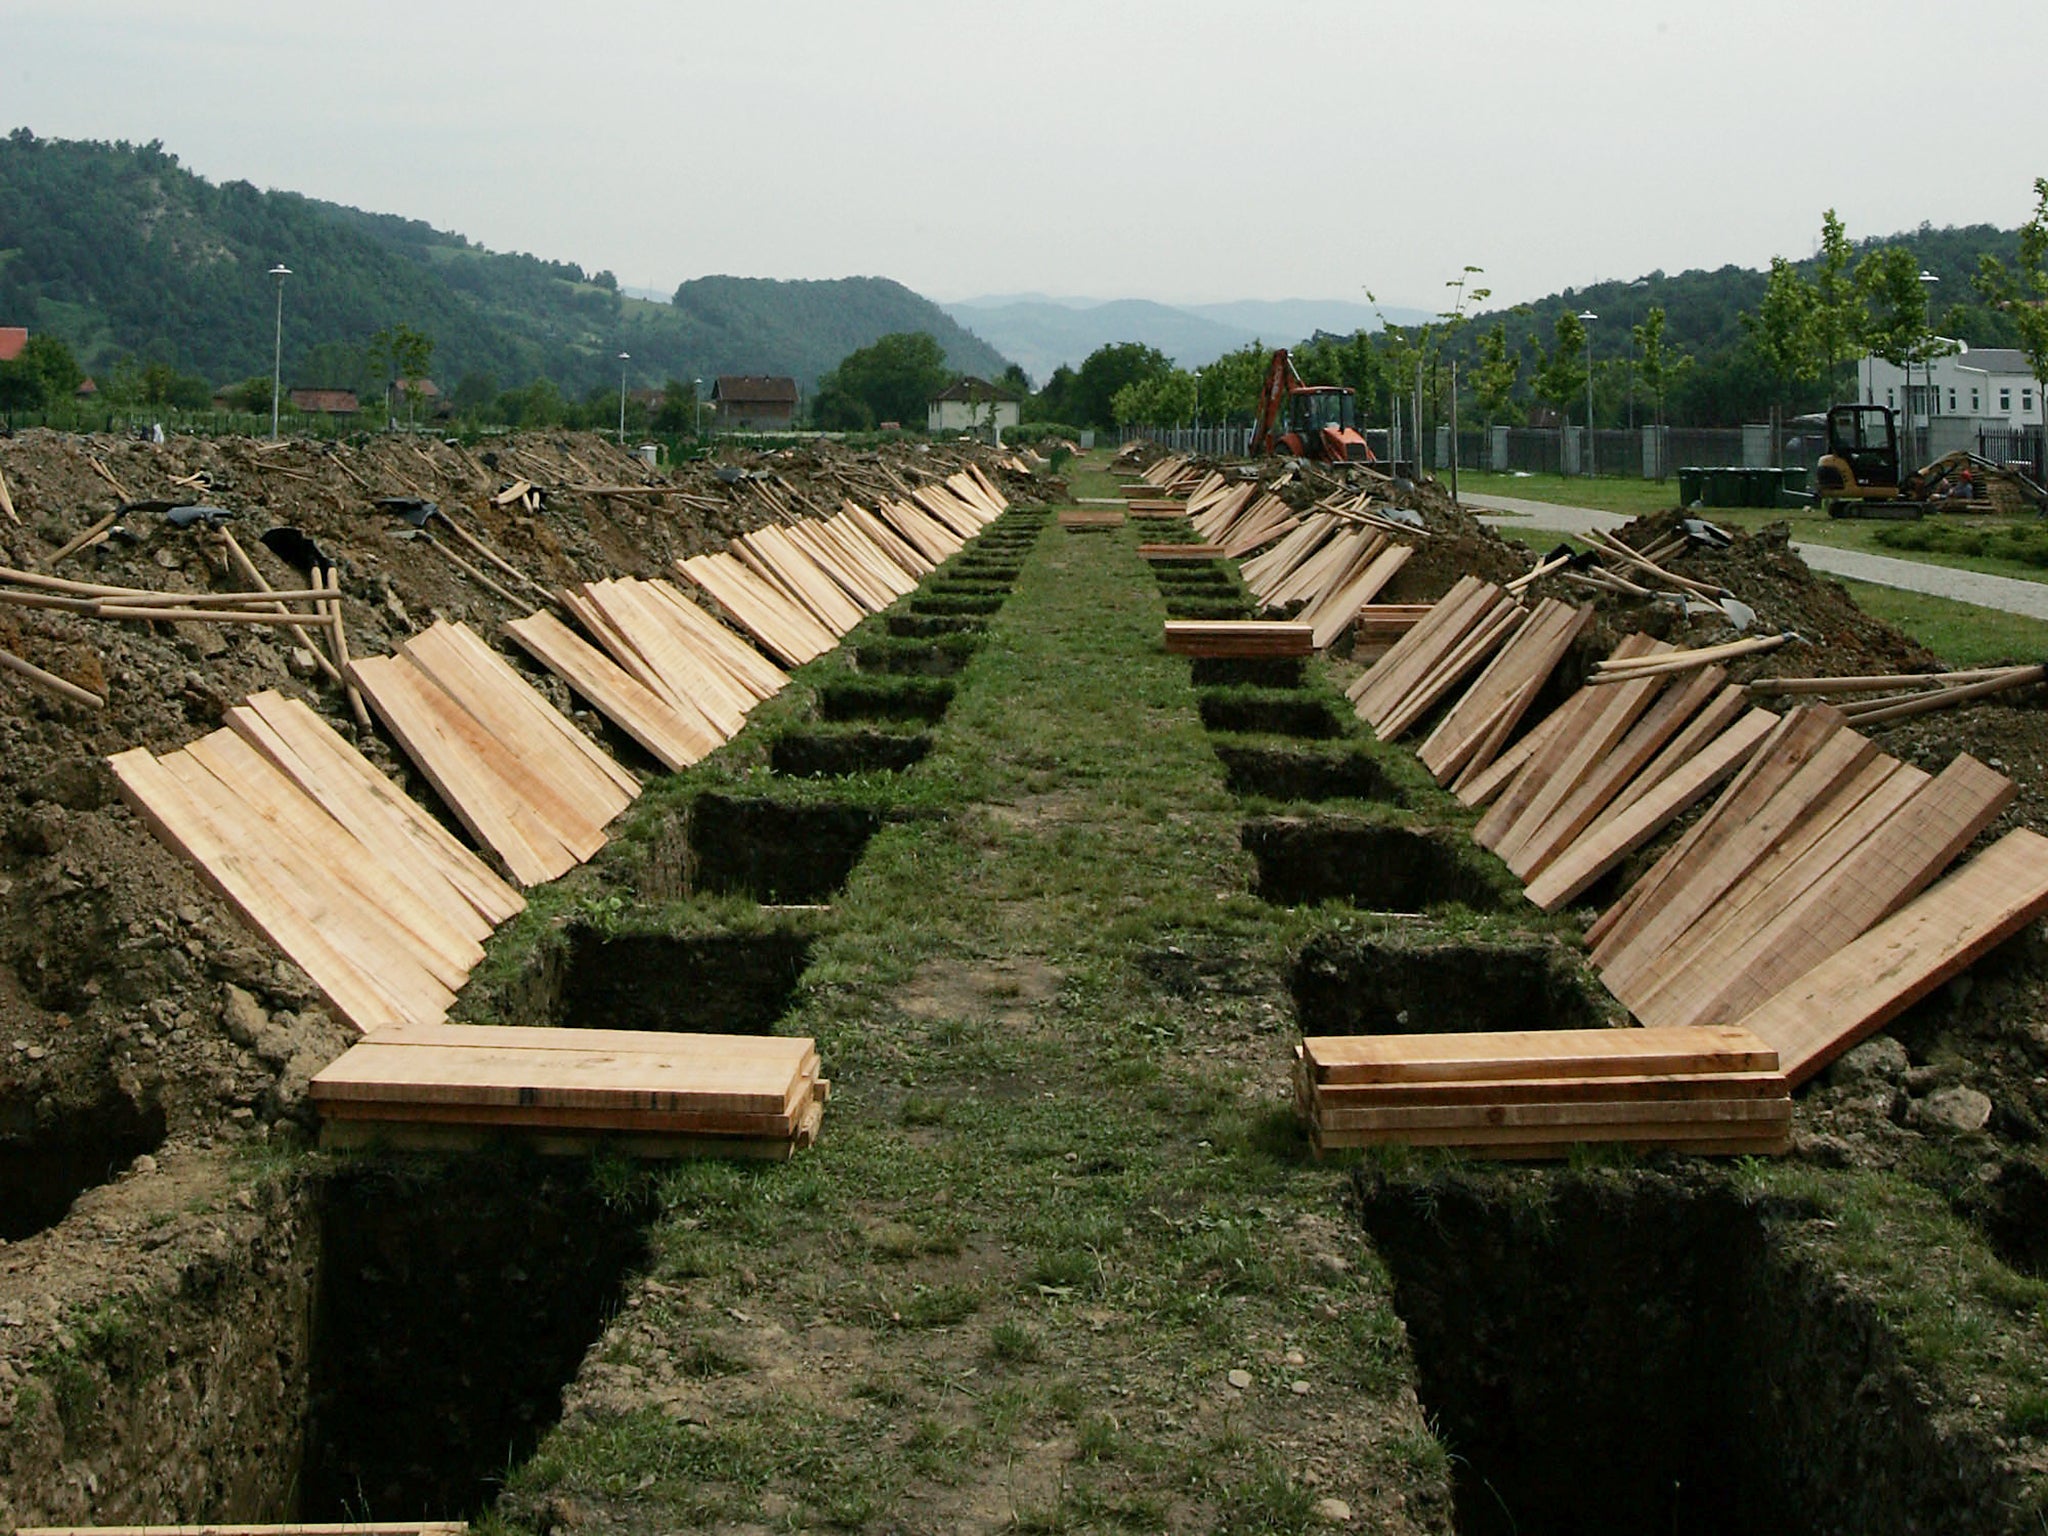 Approximately 8,000 Muslims, mostly boys and men, were slaughtered at Srebrenica in July 1995 by Bosnian Serb soldiers. Ten years later, 610 bodies that were exhumed and identified received a formal burial at the Srebrenica Memorial